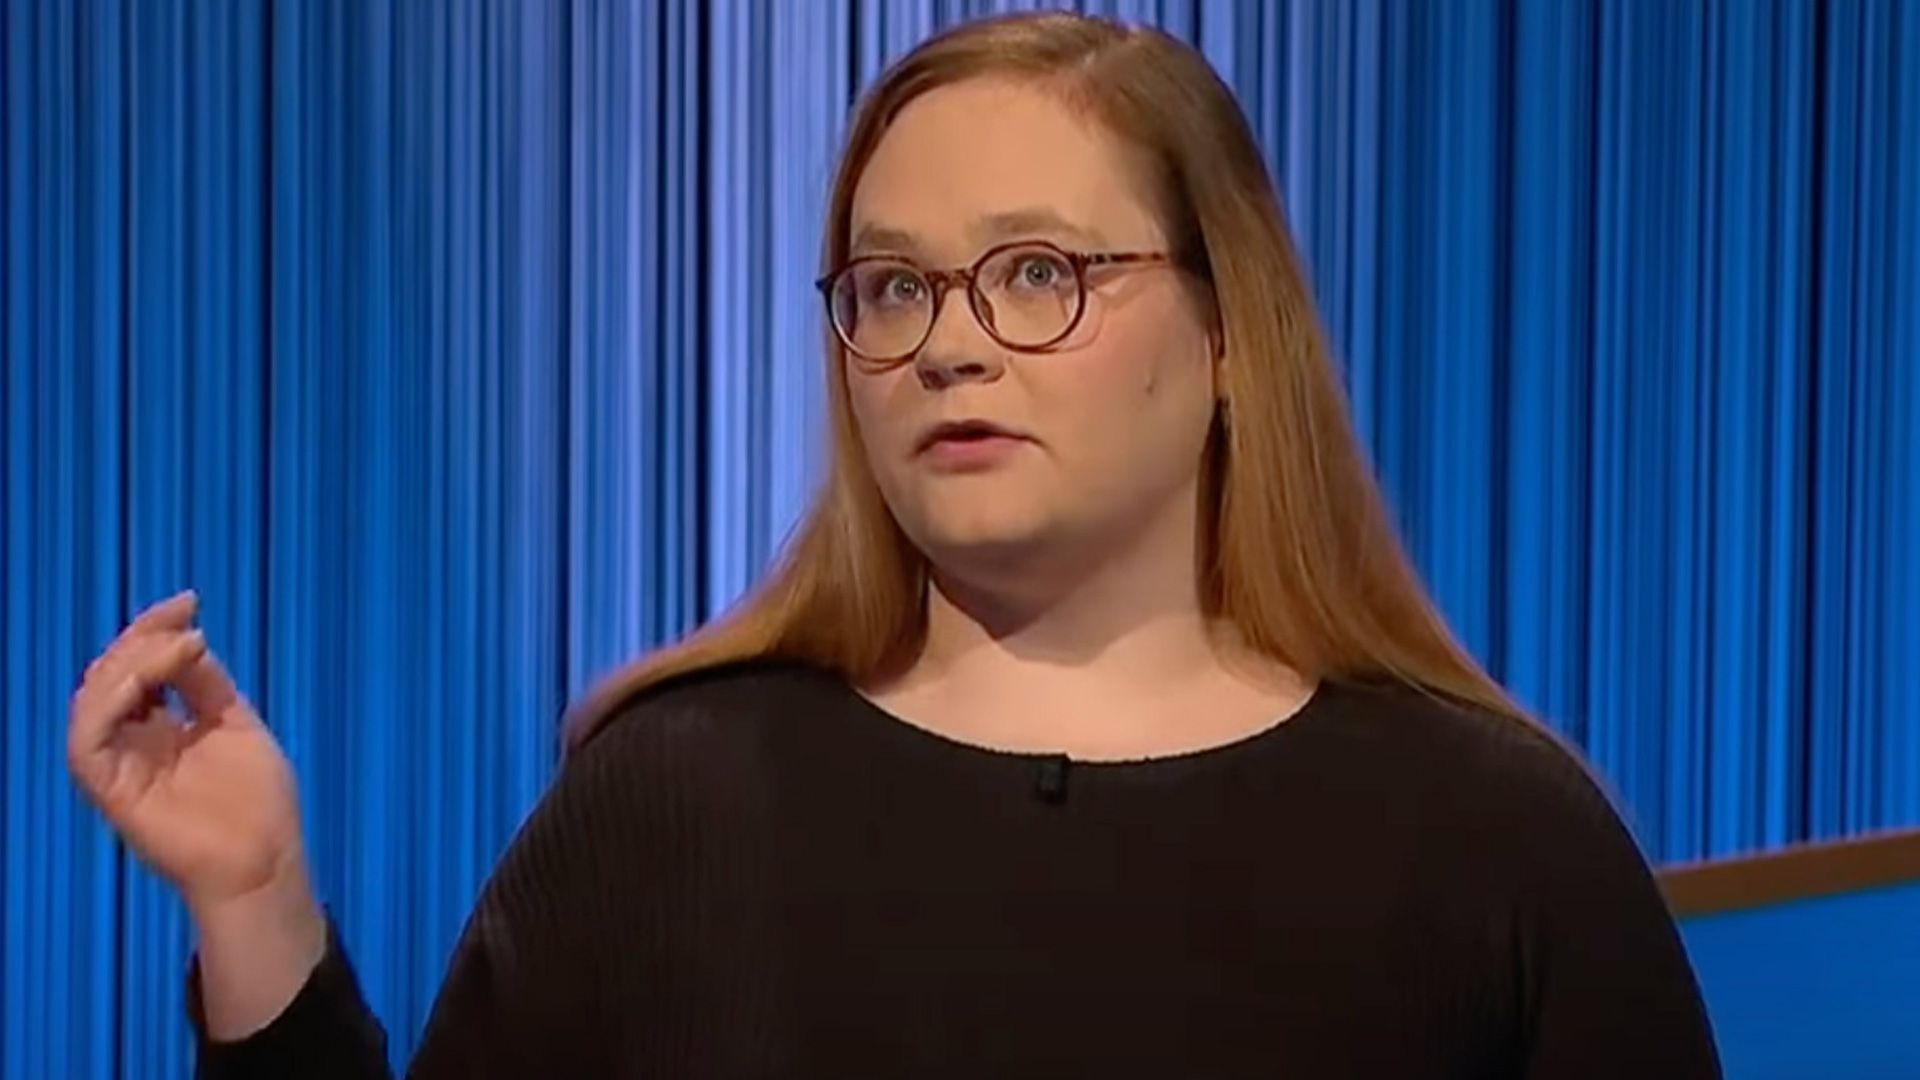 Jeopardy! champ Weckiai Rannila reveals powerful story of her name before losing at ‘worst possible’ time in streak [Video]